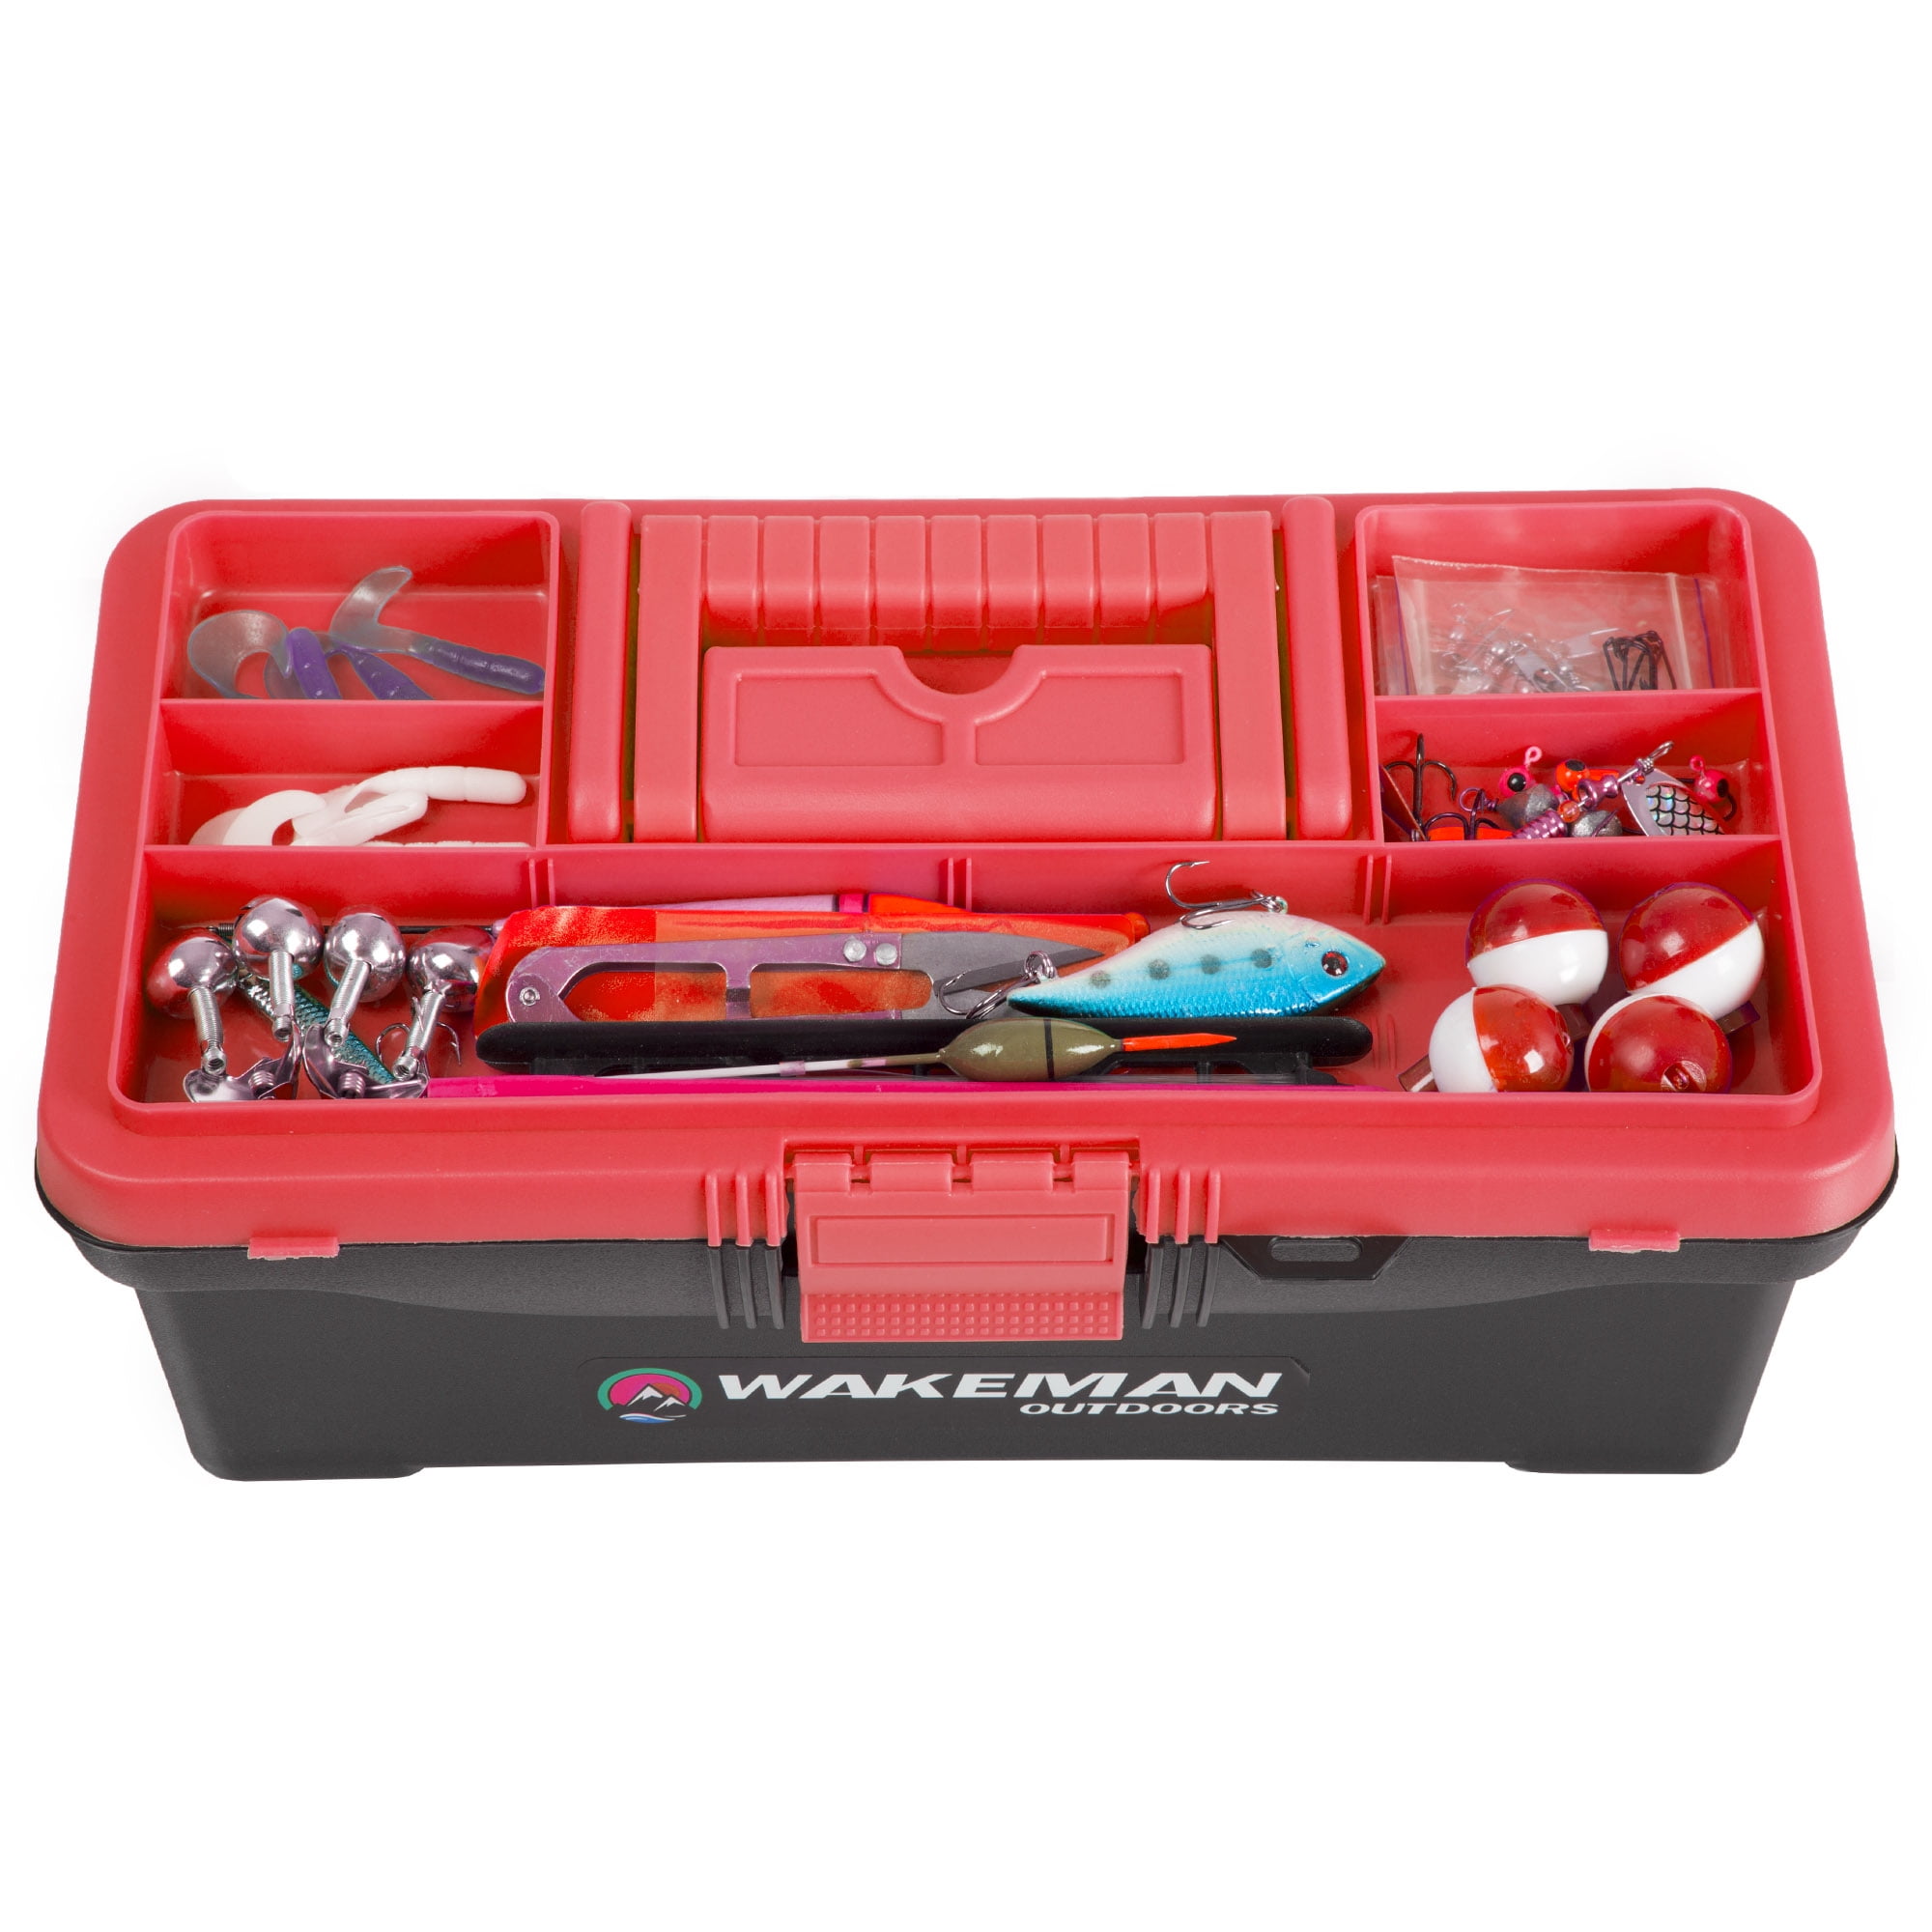 55-Piece Fishing Tackle Box Set - Includes Single Tray Box, Sinkers, Lures,  6 lbs. Line, Stringer, Hooks and Accessories 543969WJJ - The Home Depot